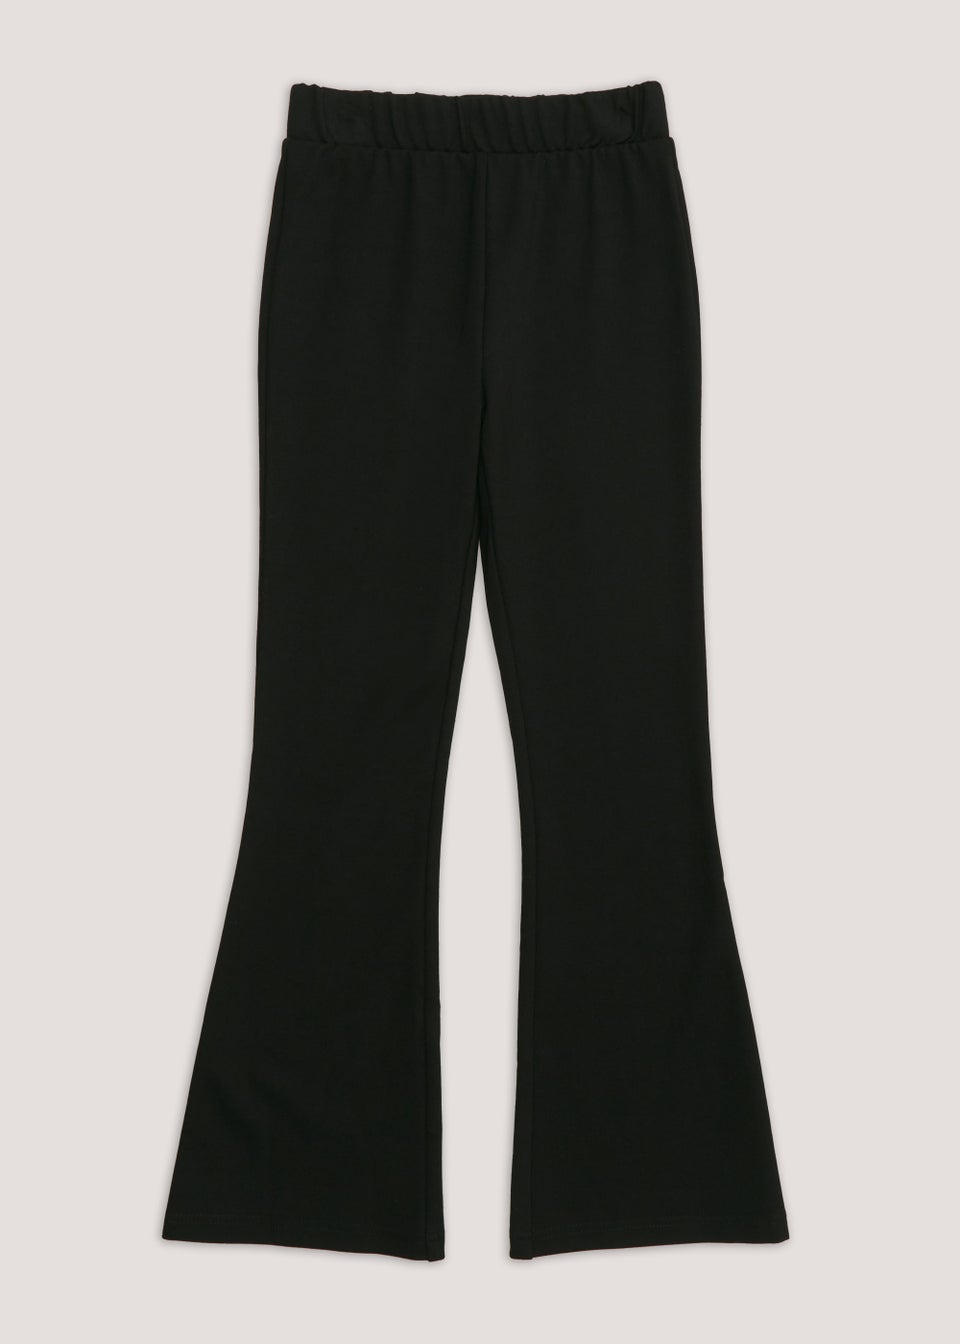 Flare Trousers  Buy Flare Trousers online in India